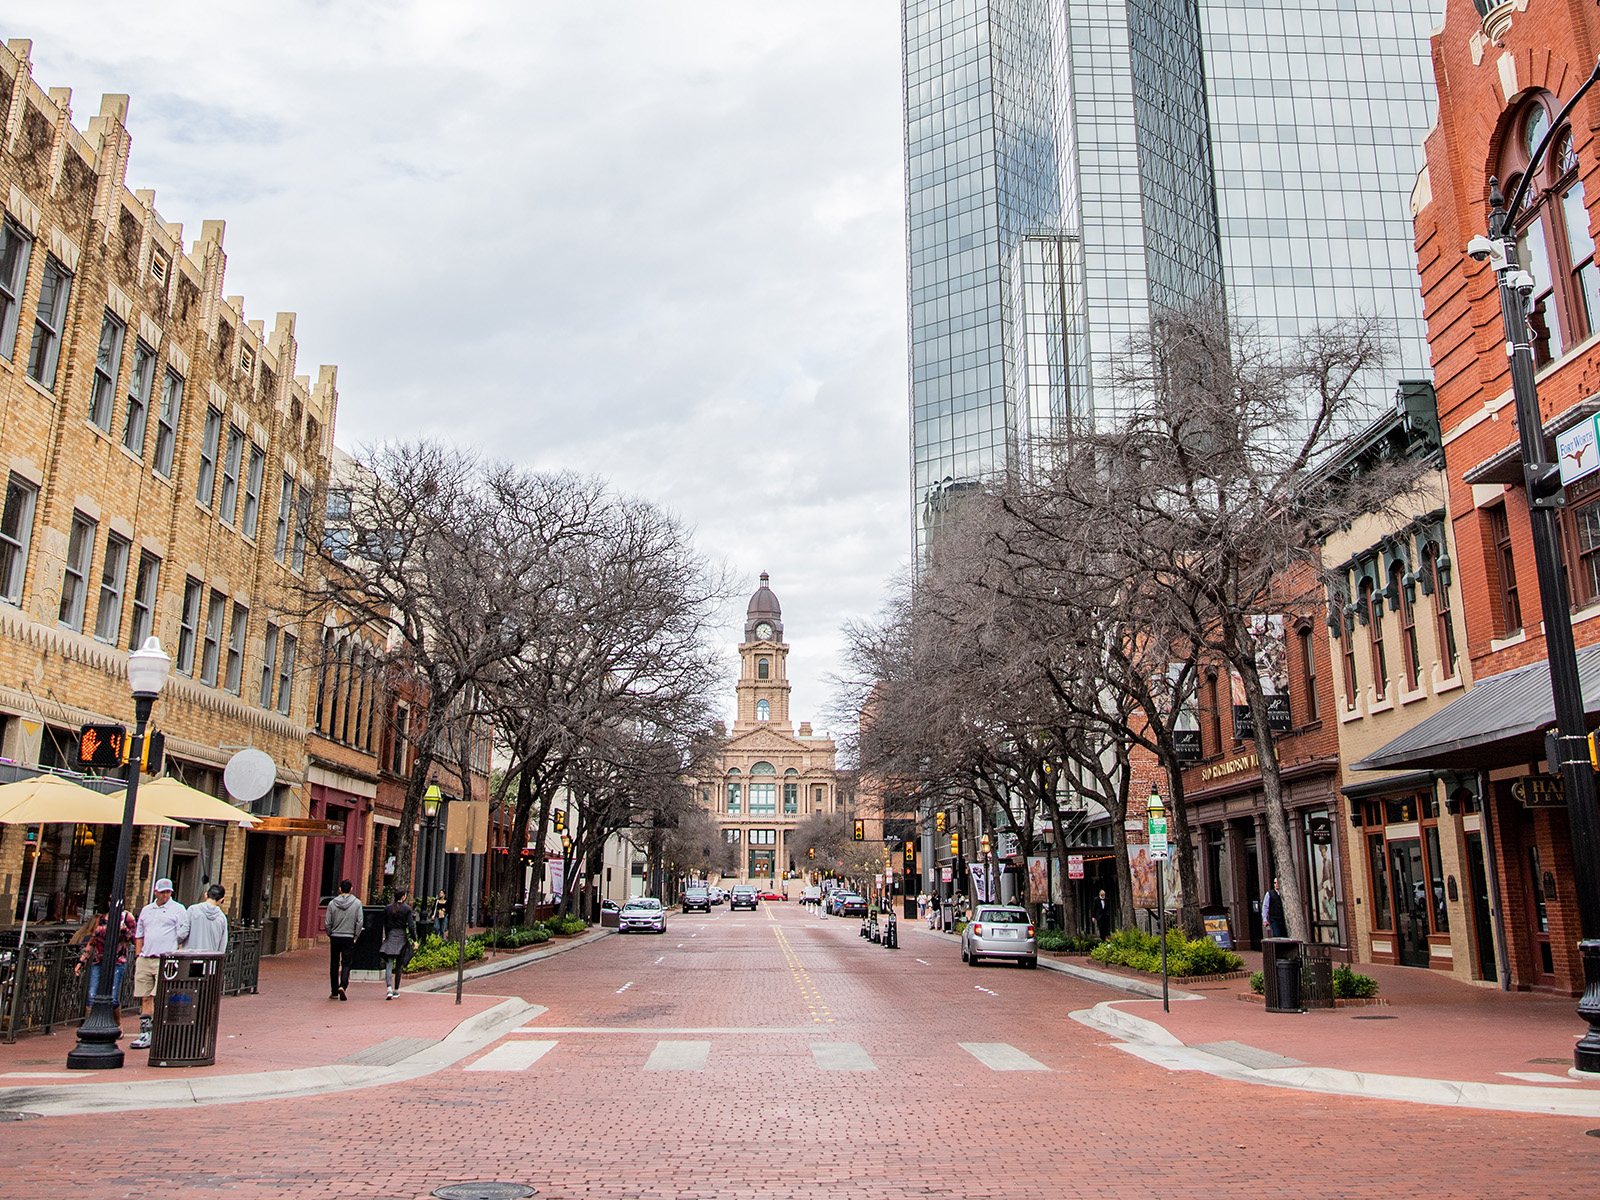 Downtown Fort Worth, Texas. Photo by Fallon Michael/Unsplash/Creative Commons